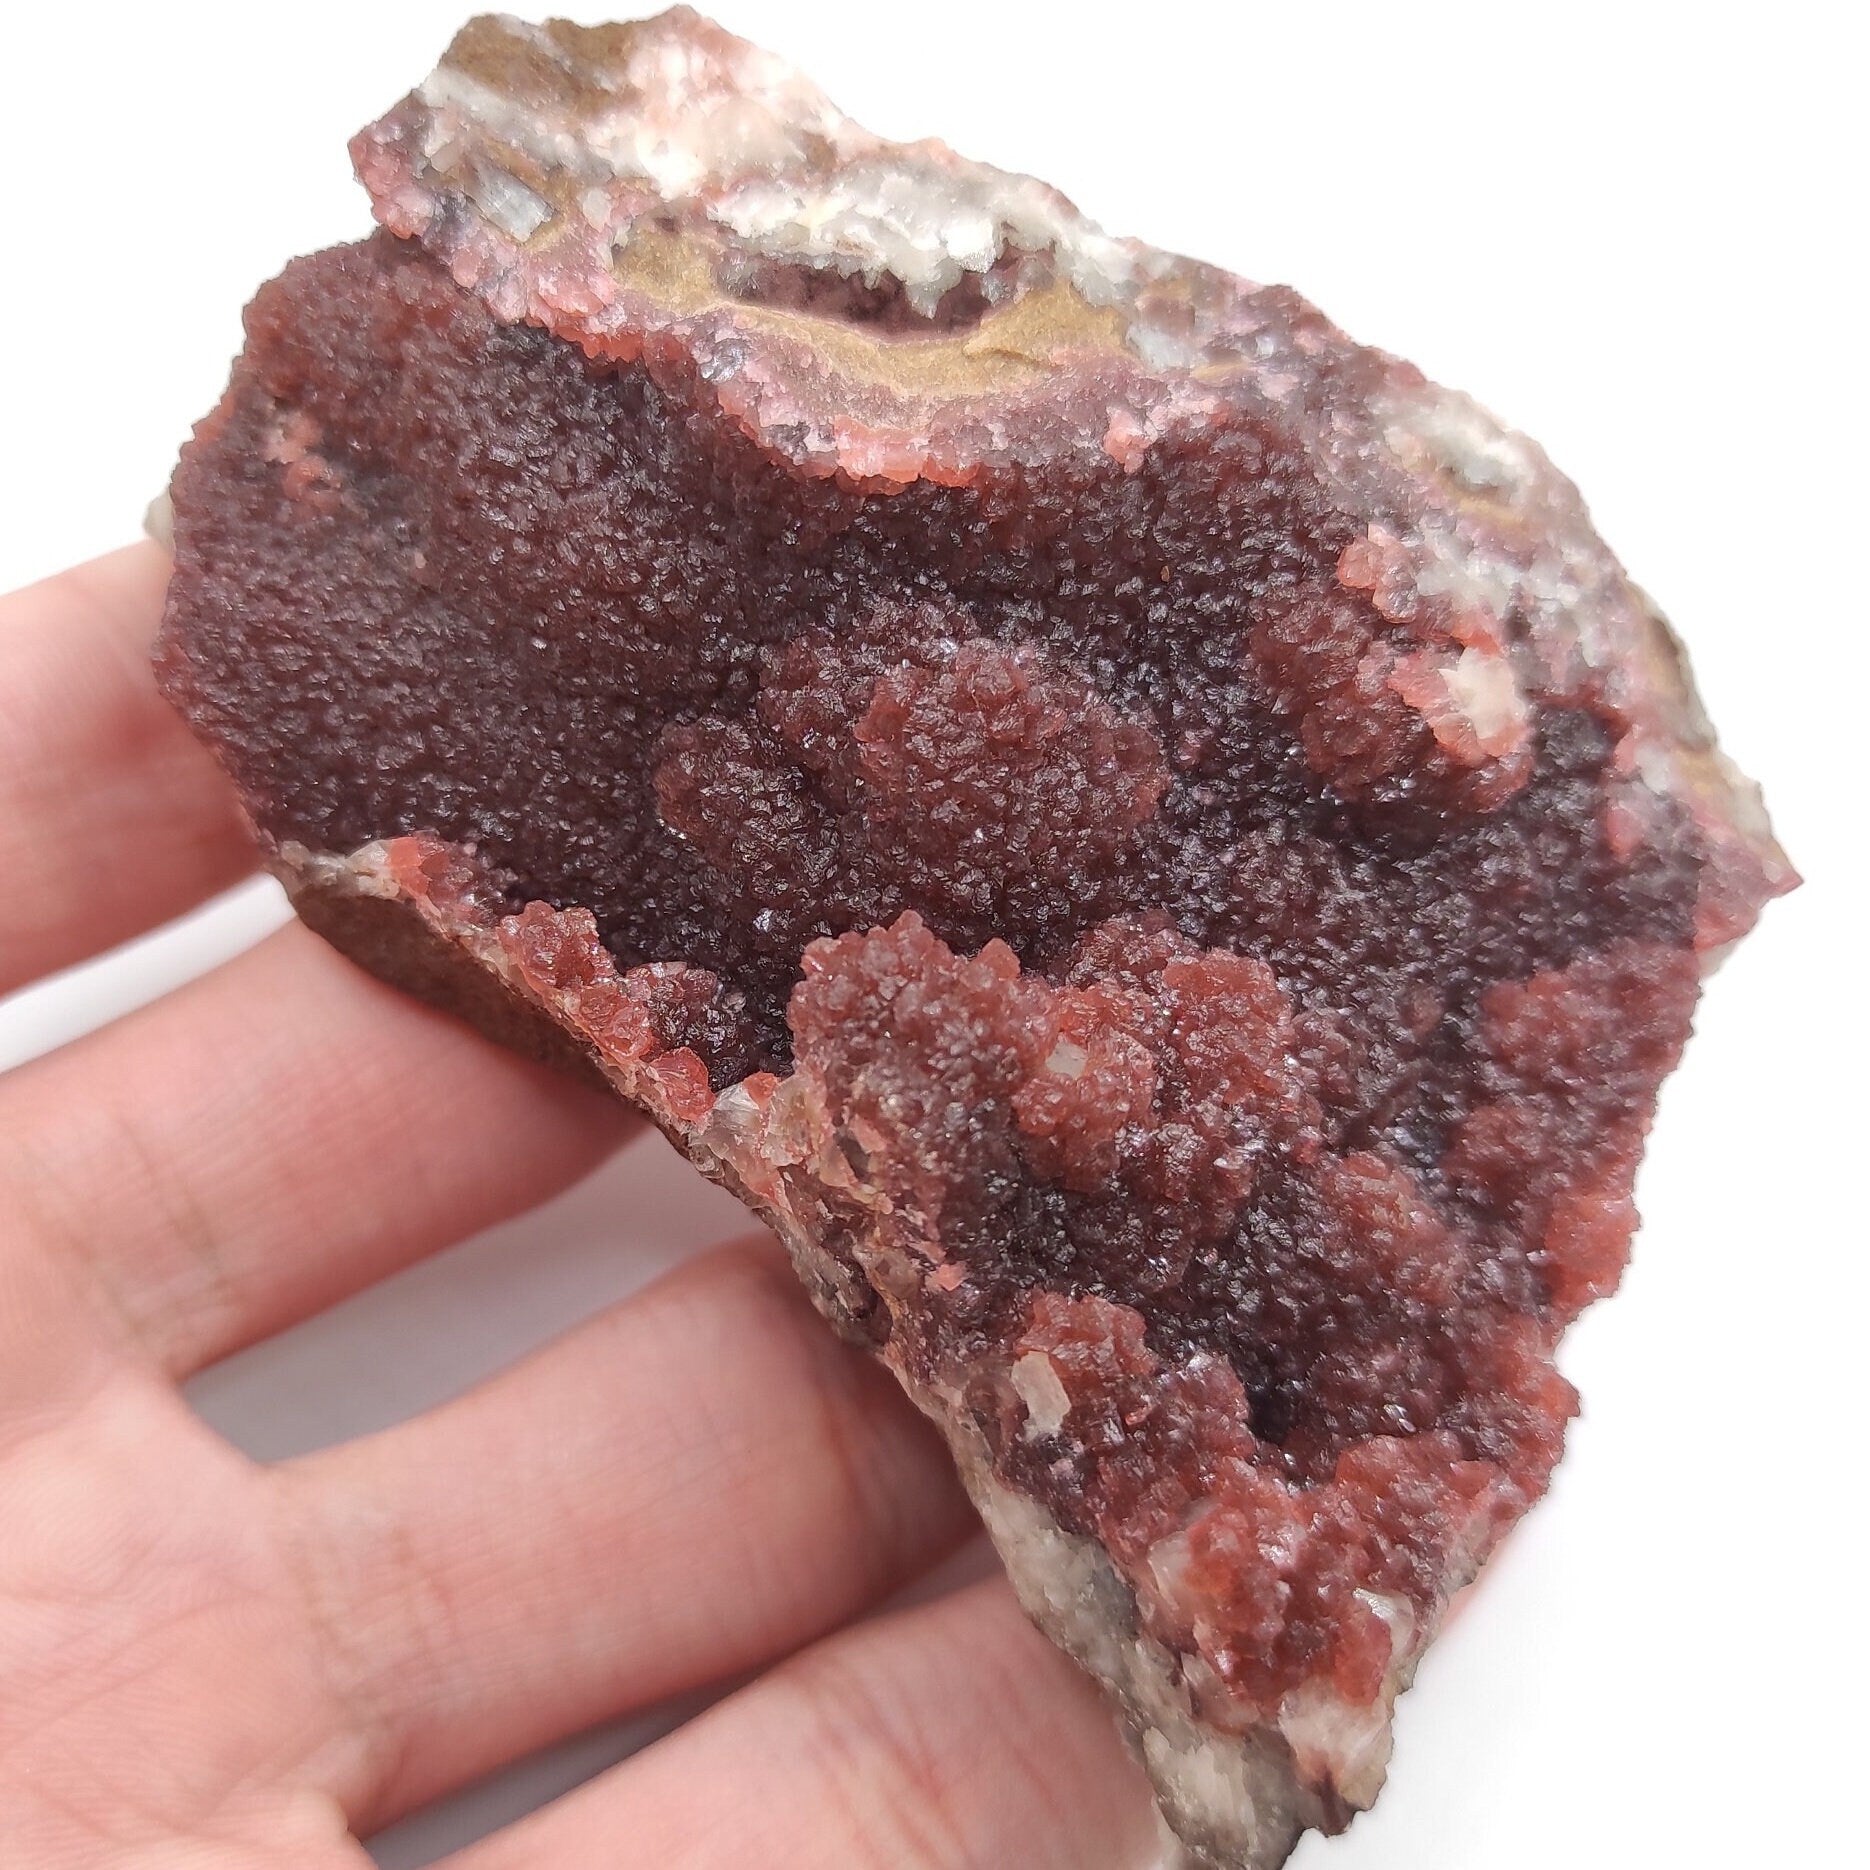 214g Roselite Mineral from Bou Azzer, Morocco - Rare Pink Roselite Mineral - Rare Mineral Specimen - Natural Crystals - Rough Gemstones